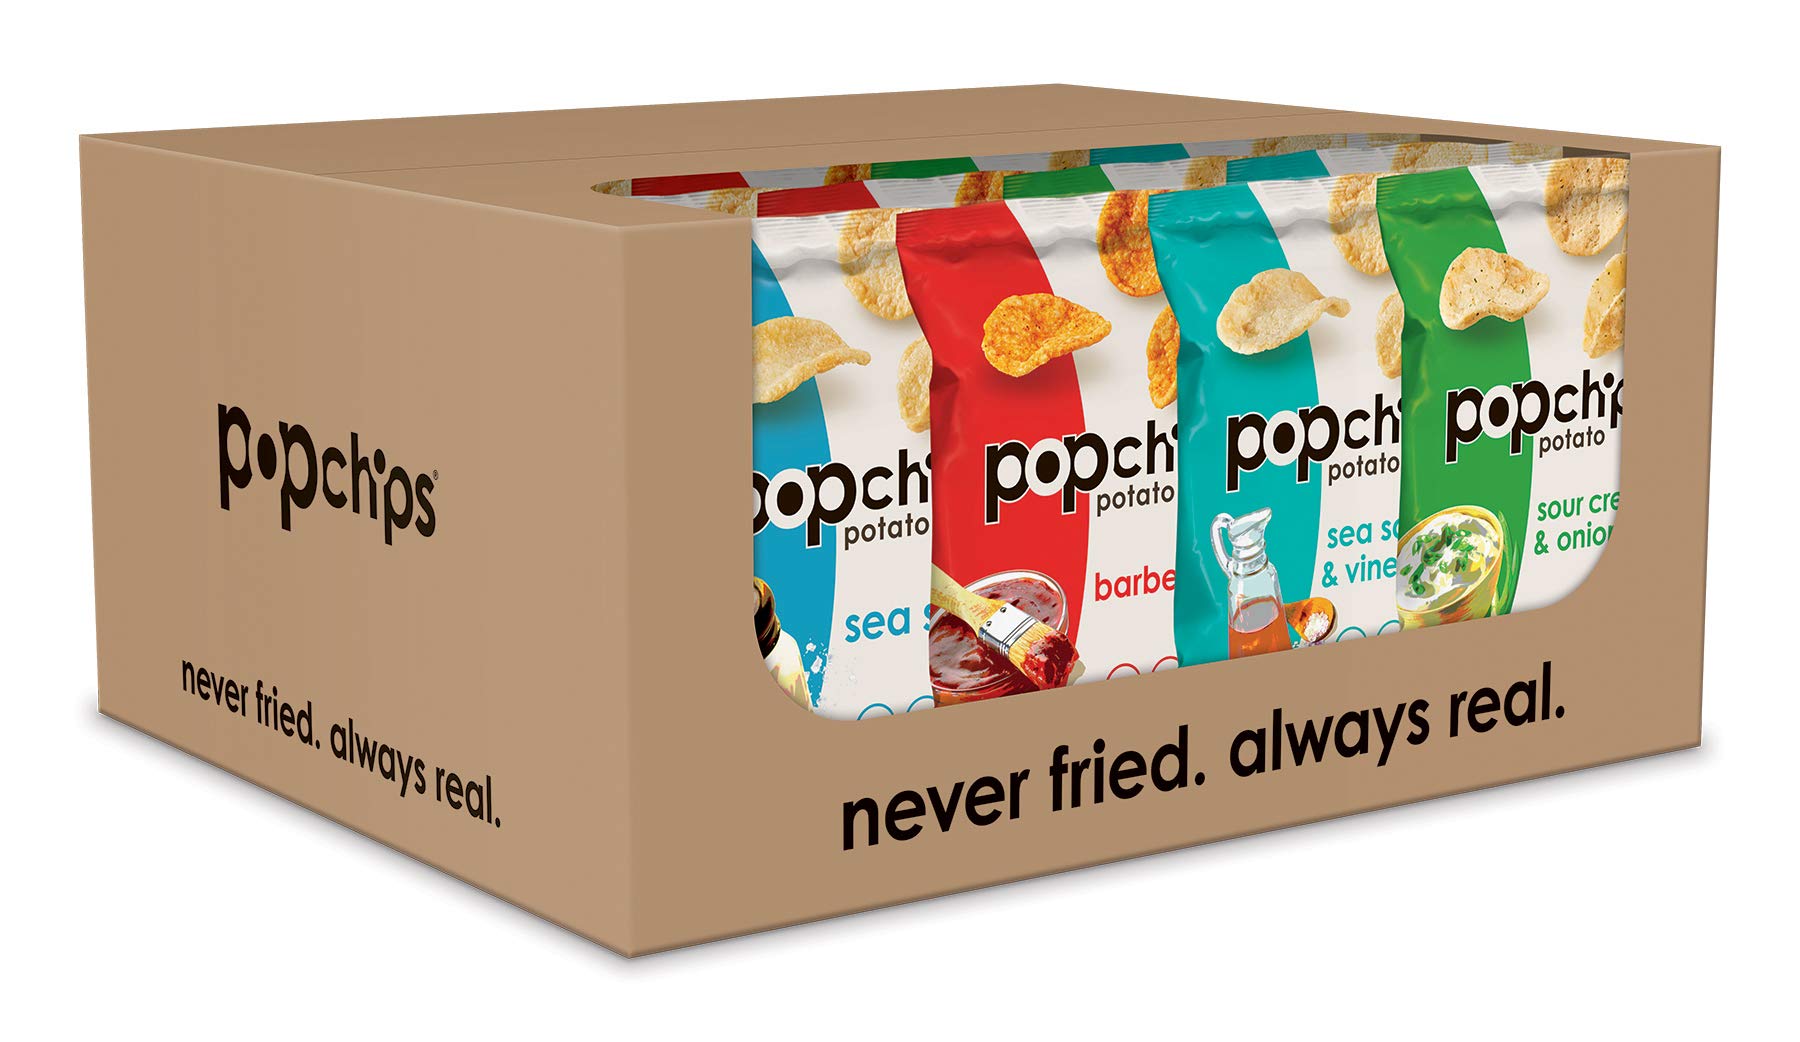 Book Cover Popchips Potato Chips Variety Pack, Single Serve 0.8 Ounce Bags (Pack of 24), 4 Flavors: 8 Sea Salt, 8 BBQ, 4 Sour Cream & Onion, 4 Salt & Vinegar 4 Flavor Variety Pack 0.8 Ounce (Pack of 24)